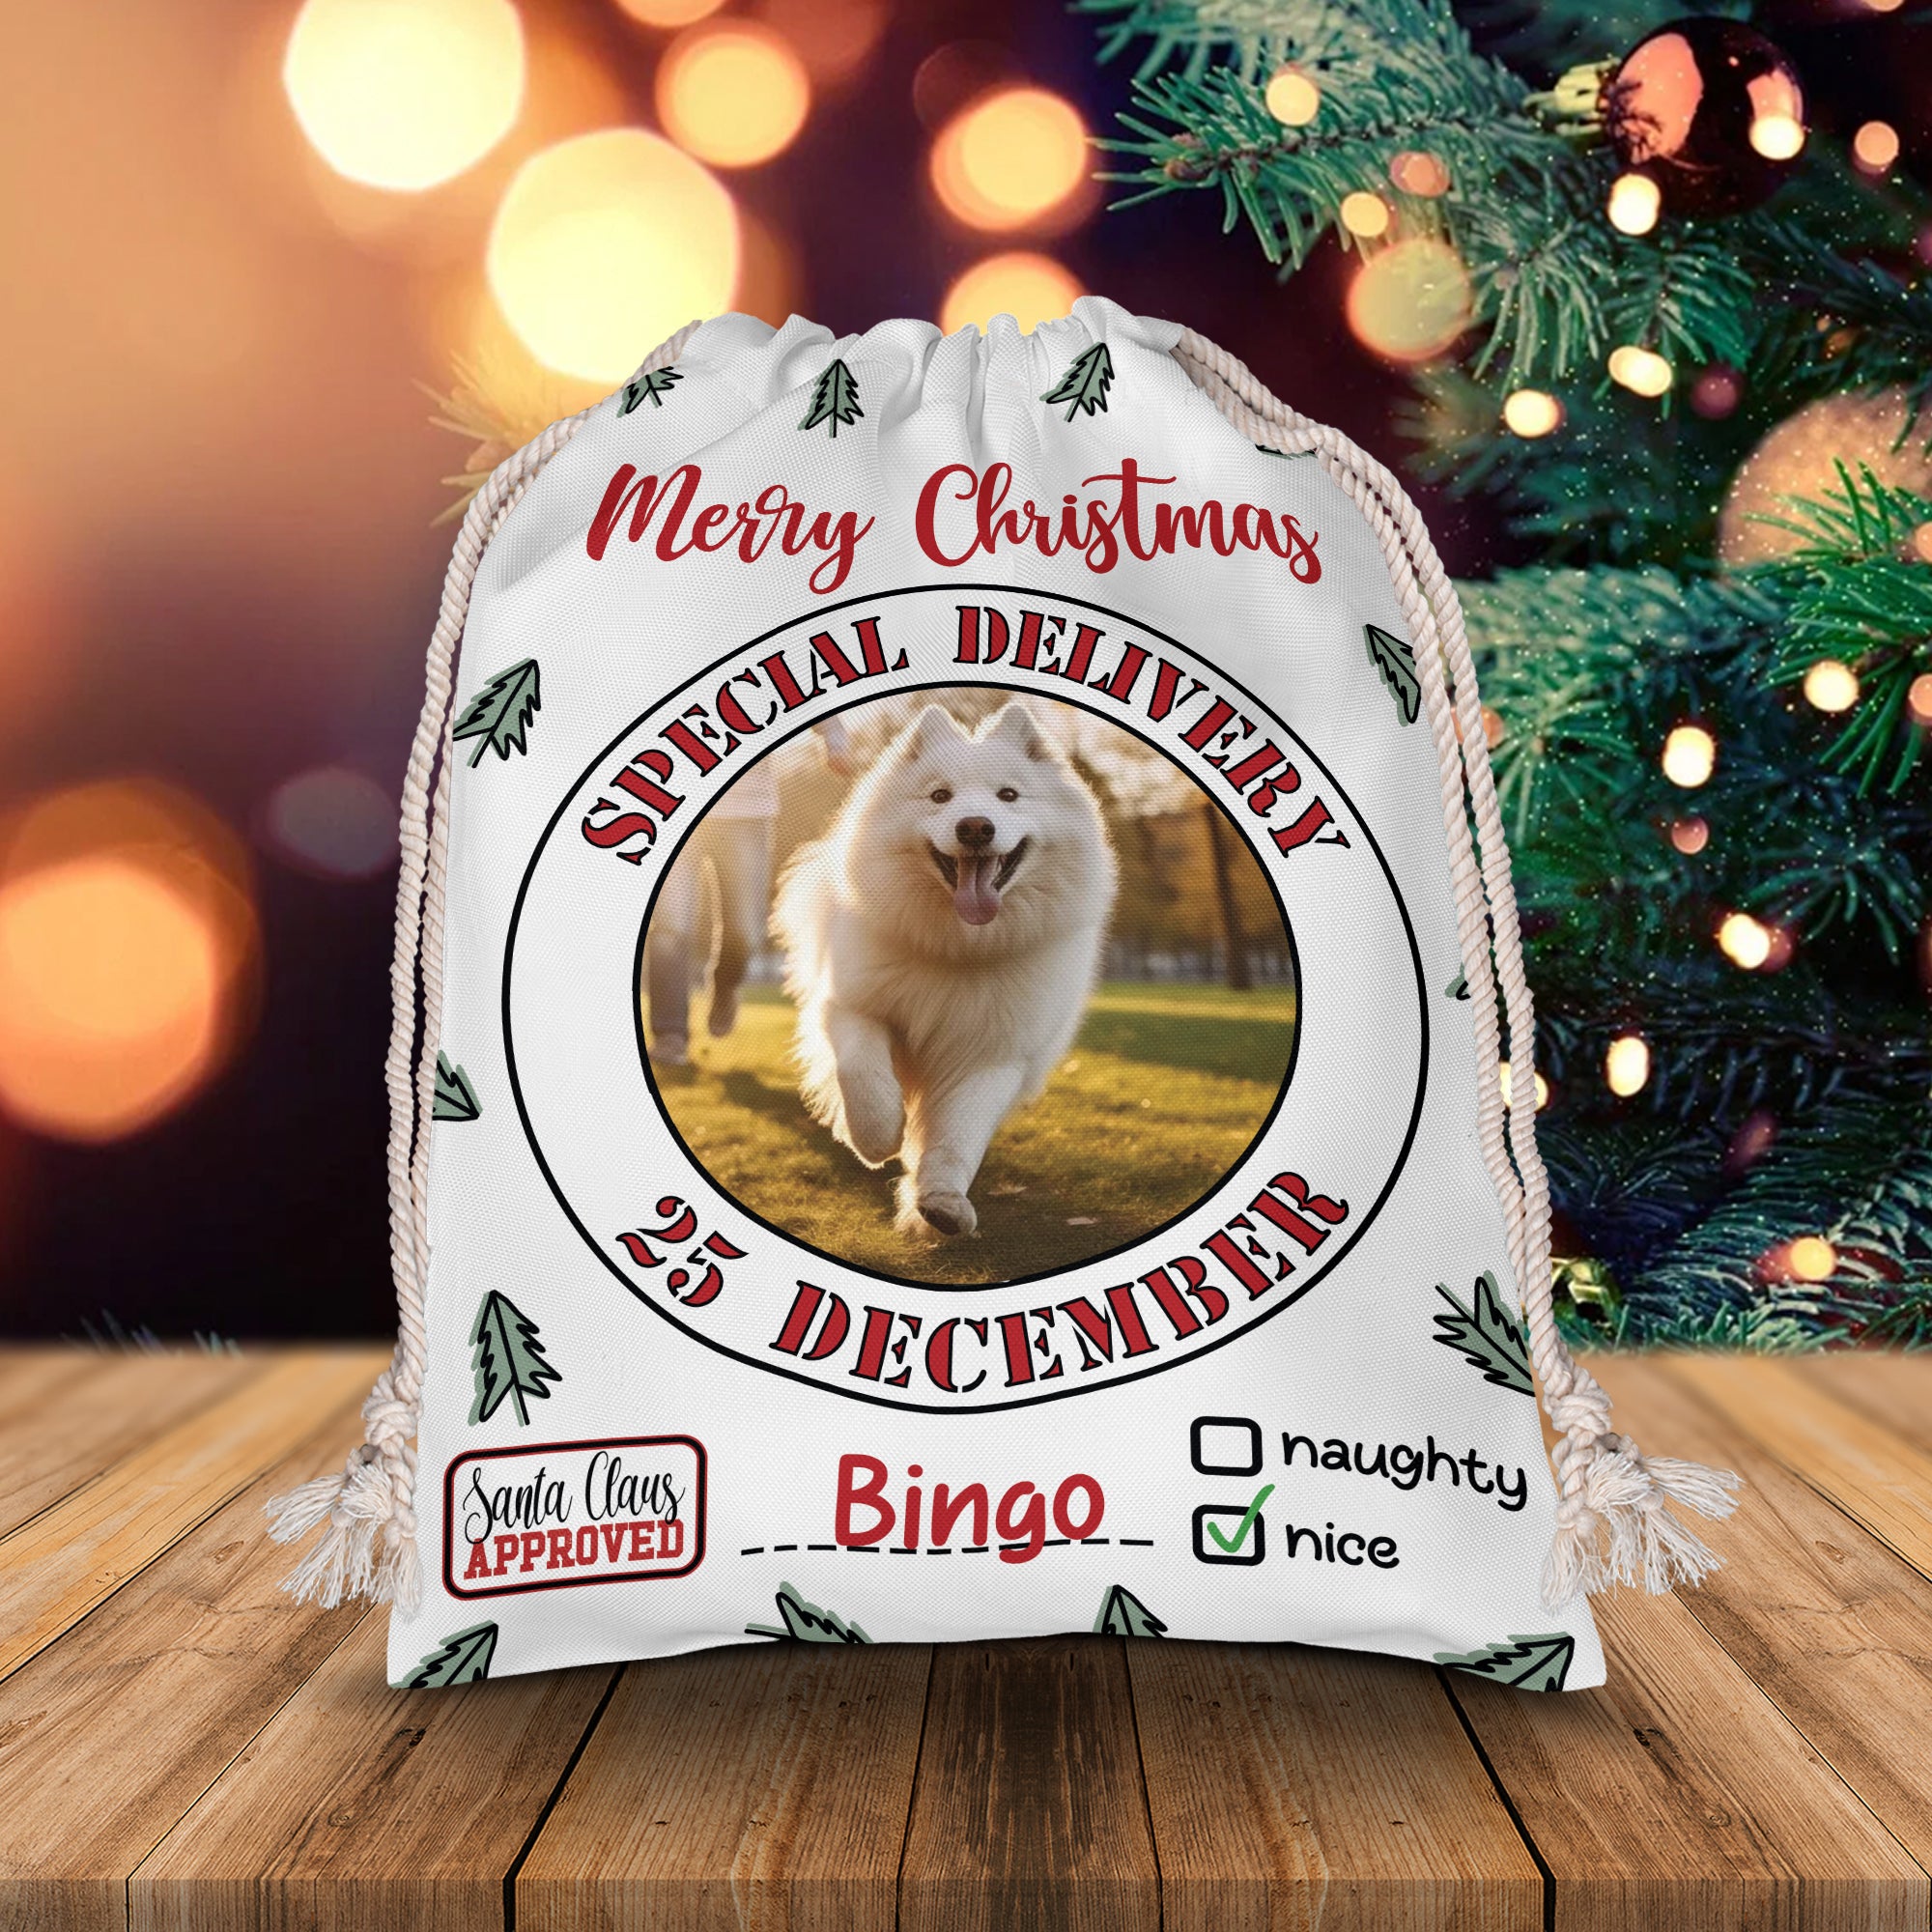 Merry Christmas Special Delivery 25 December - Custom Photo And Name, Personalized String Bag, Gift For Pet Lover, Christmas Gift